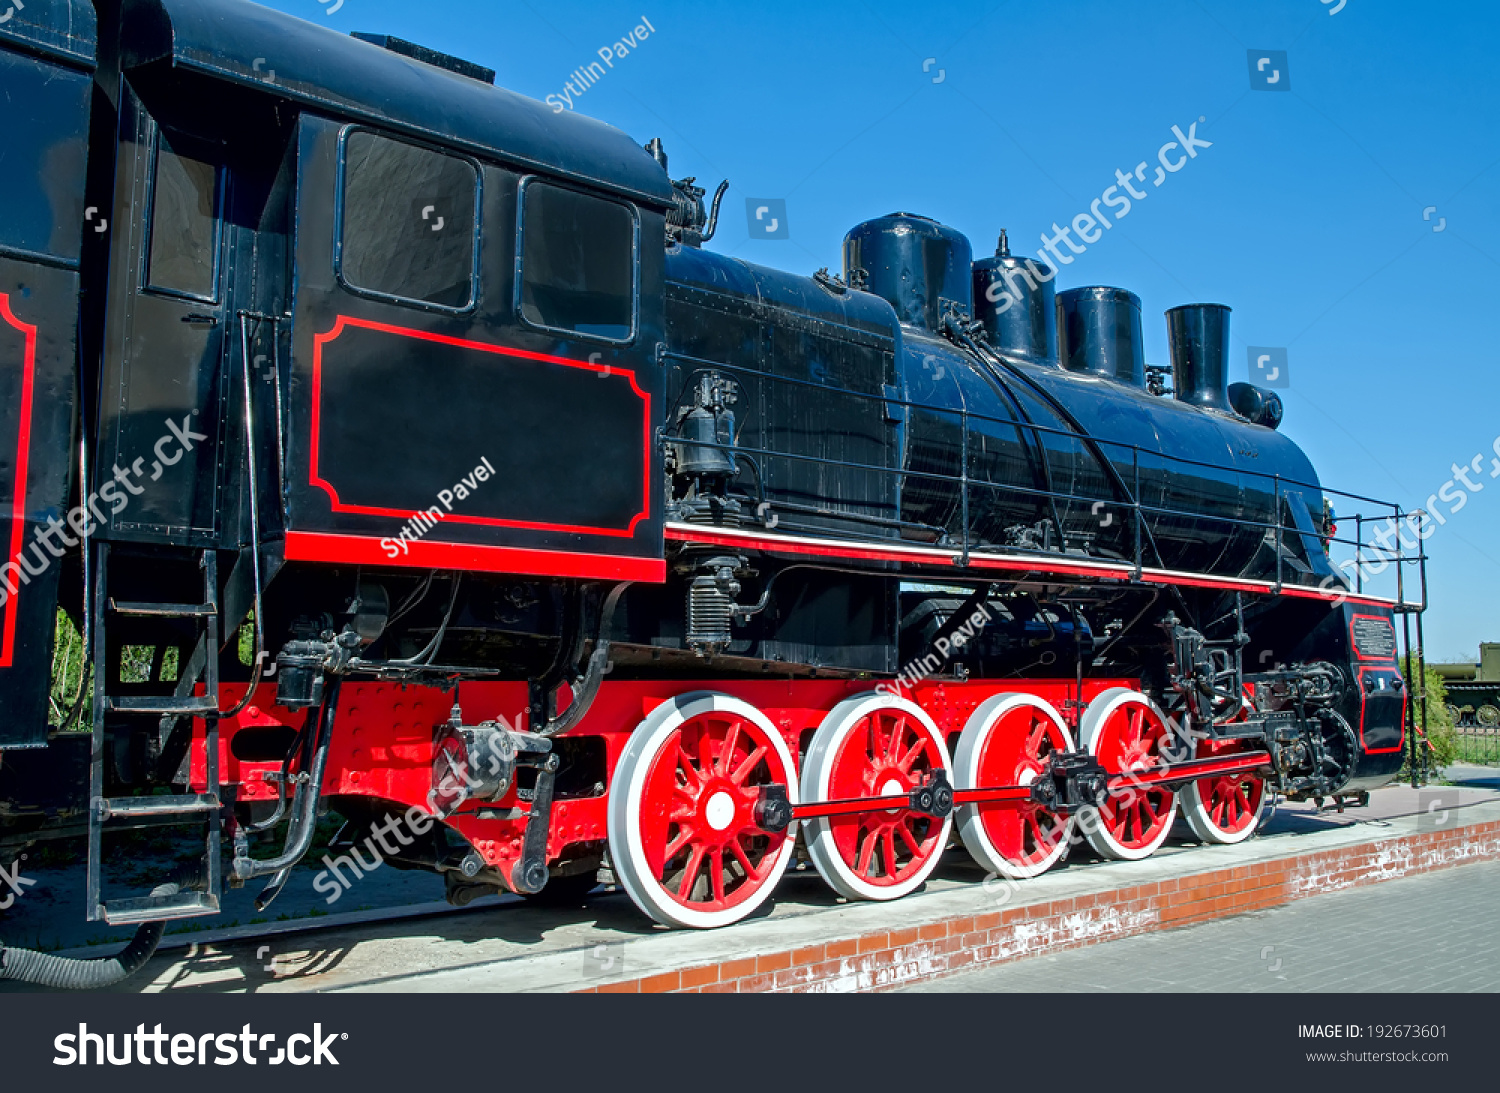 Old Russian Soviet Steam Locomotive On A Pedestal On A Background